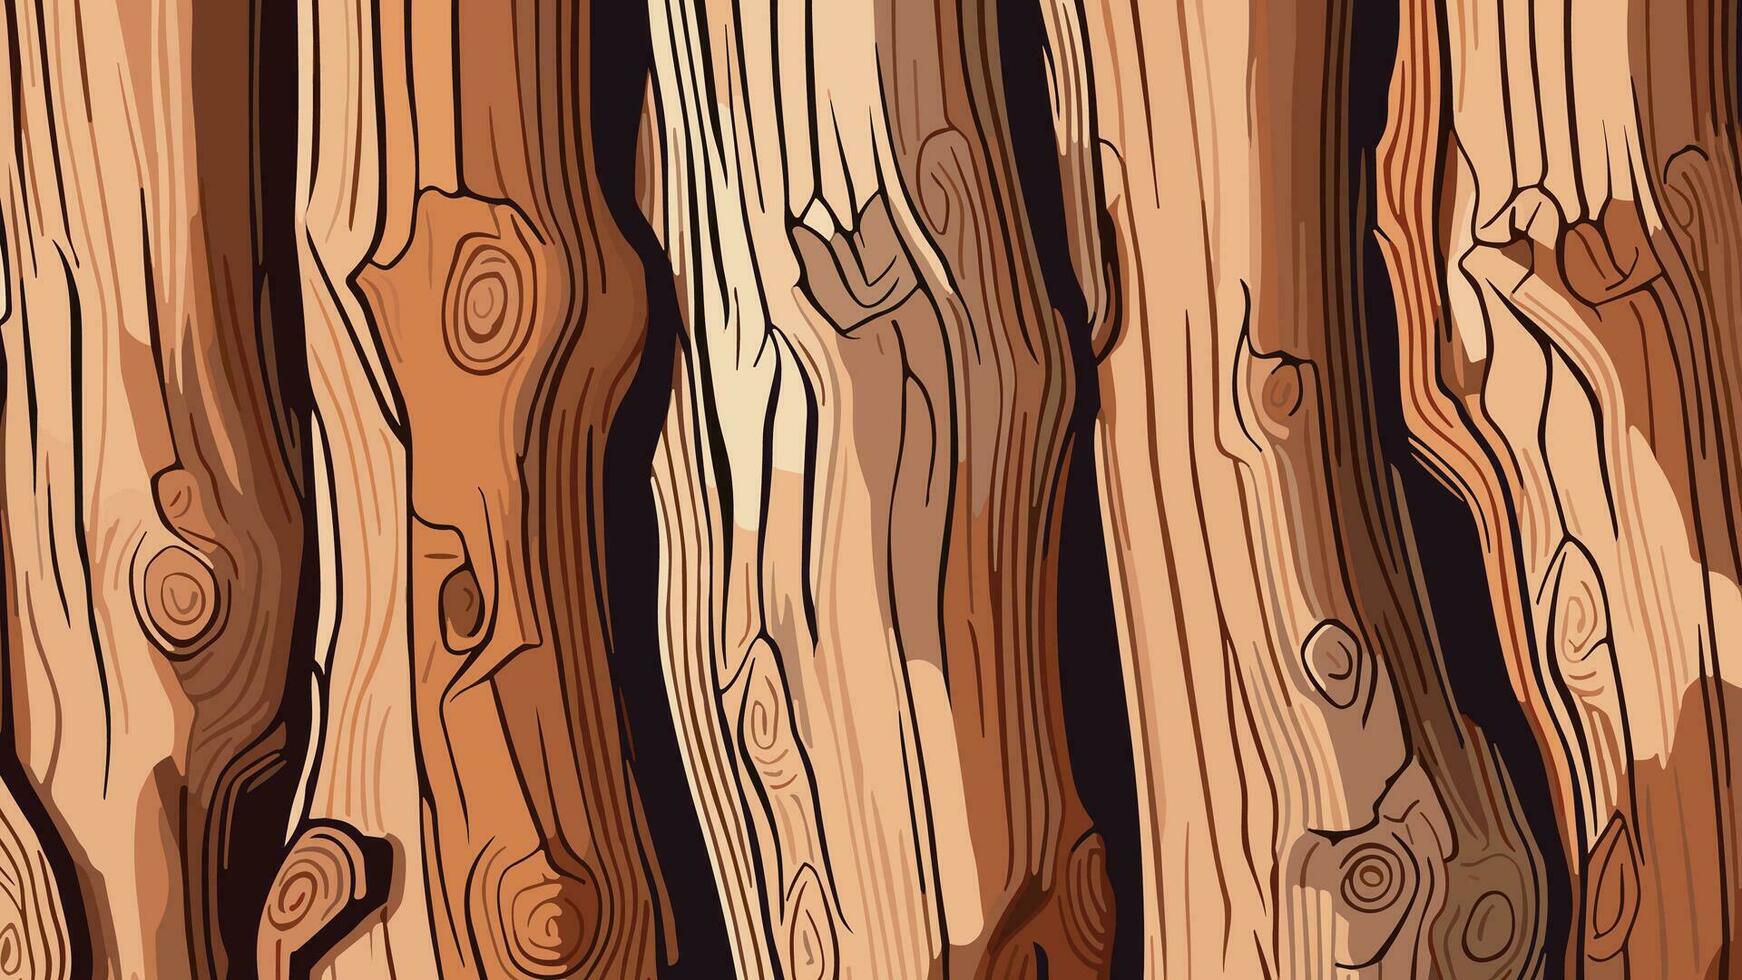 Wood texture background with natural patterns and grains. High quality image for design, print, web, and art projects. vector